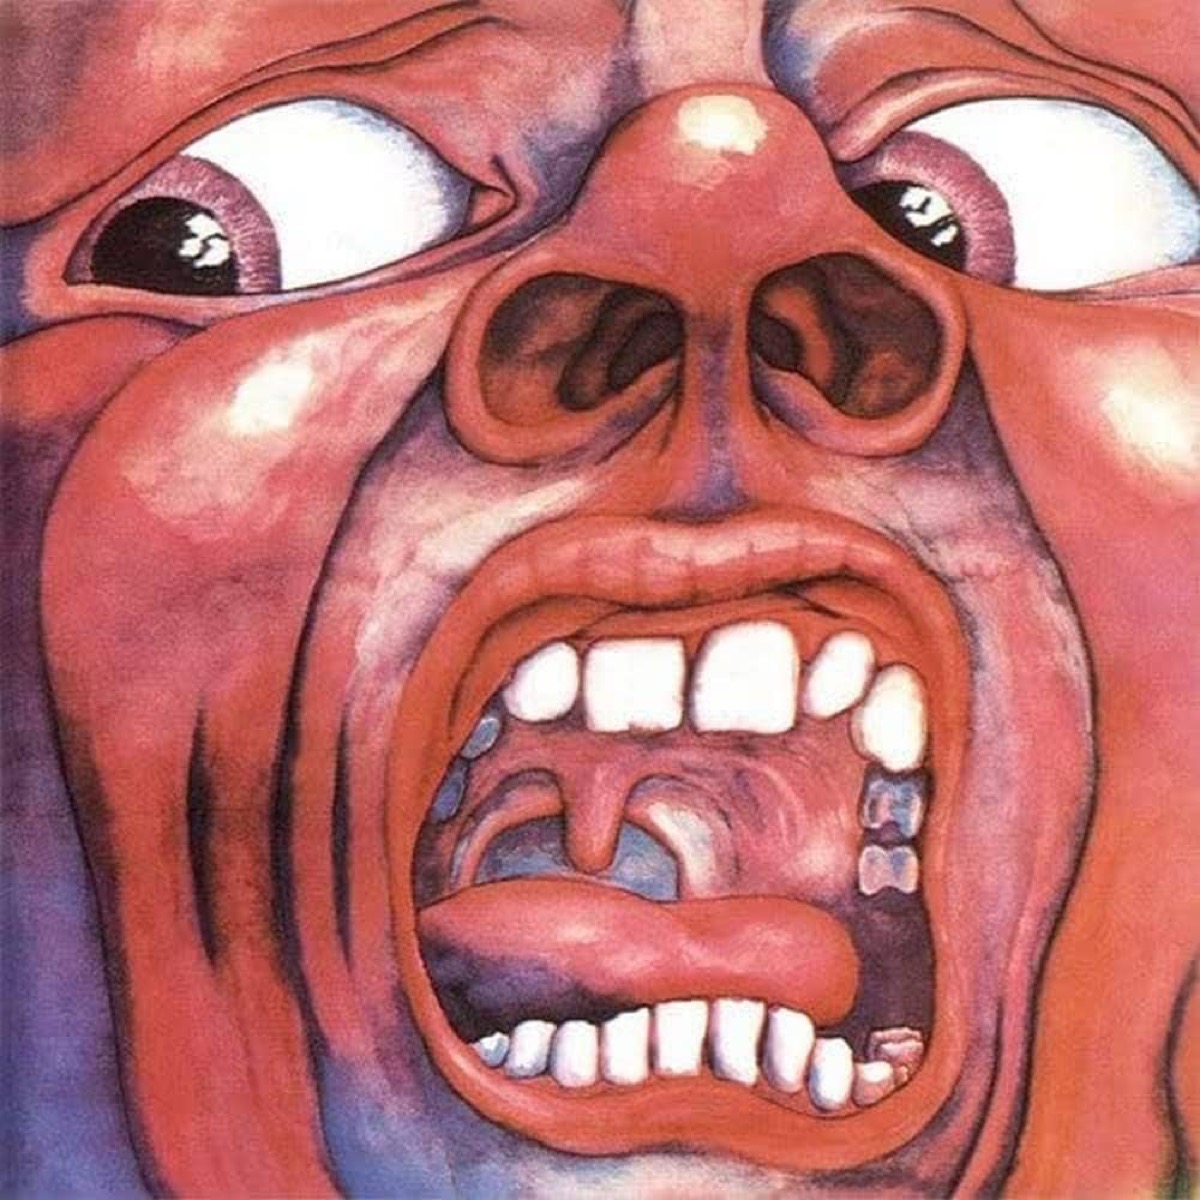 "In the Court of the Crimson King" by King Crimson album cover